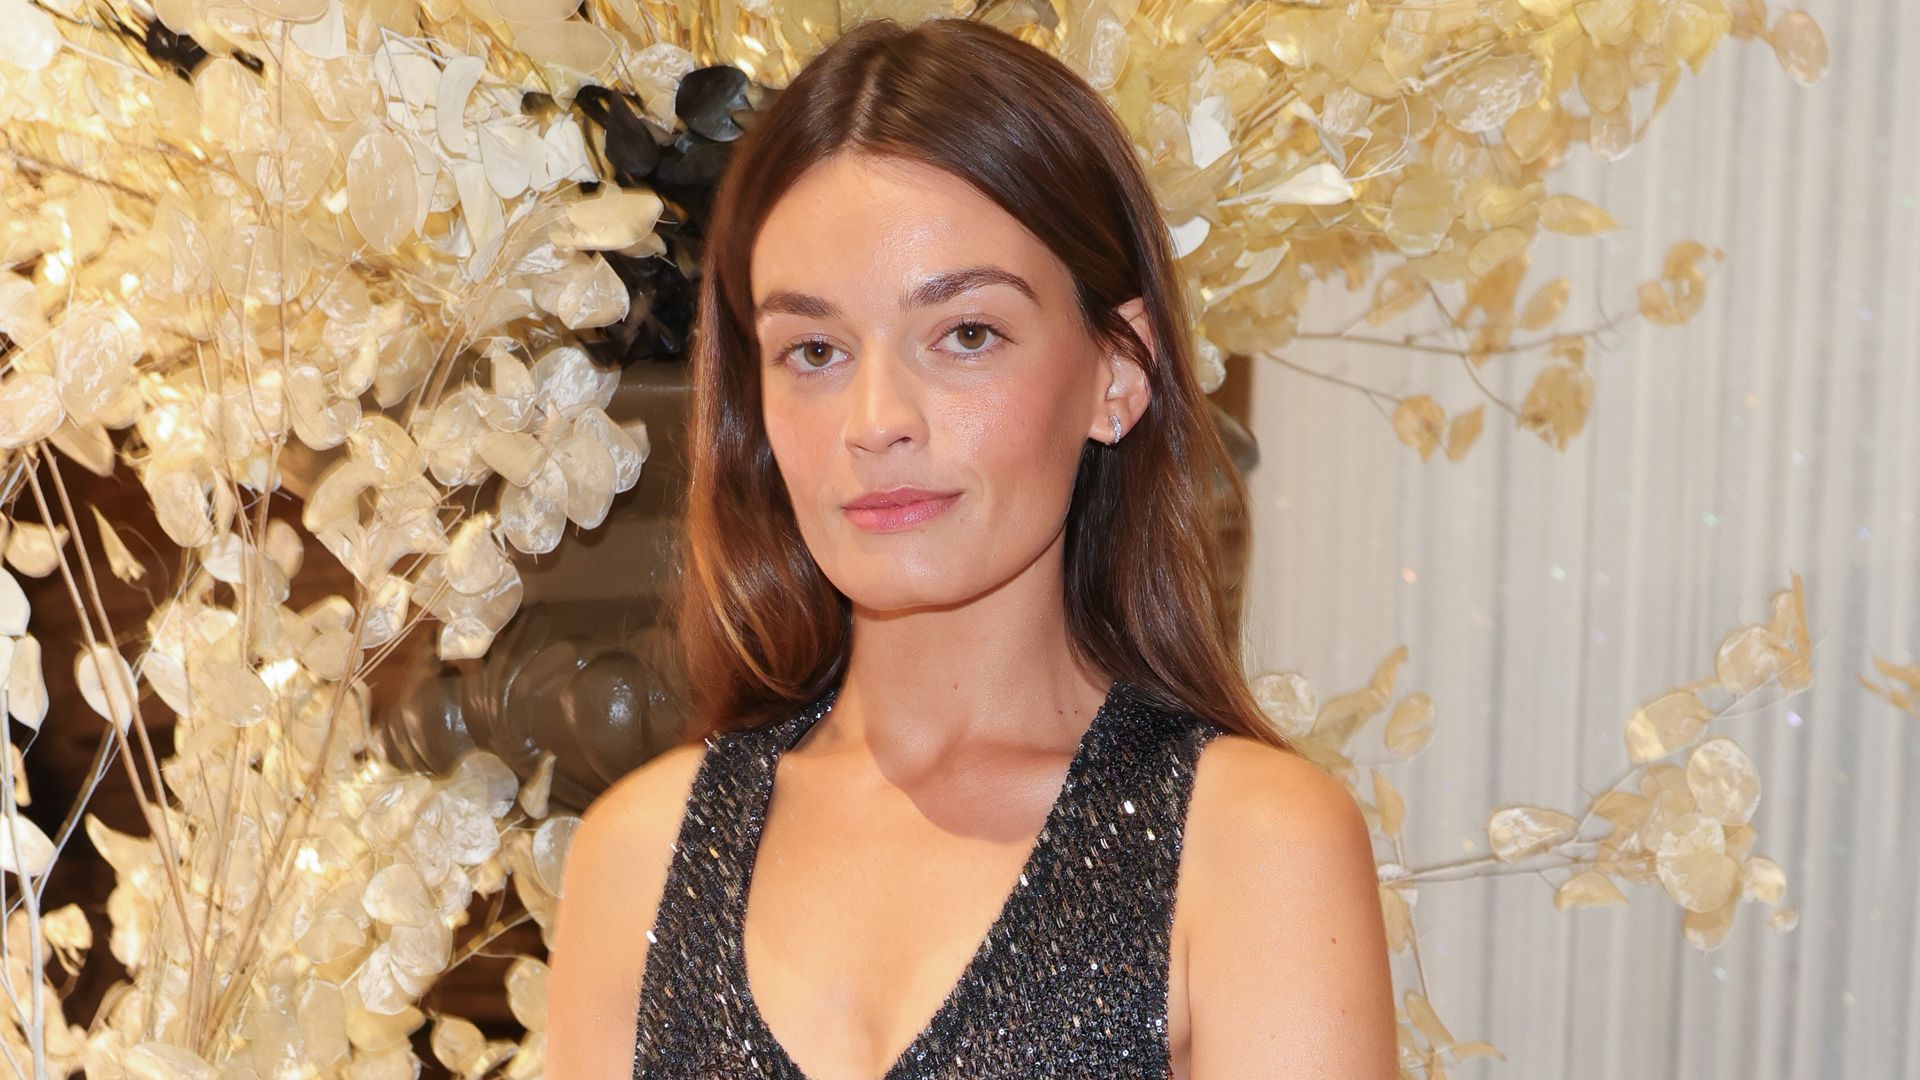 Emma Mackey wore a daring sheer Chanel dress for a lavish Paris event, and we are obsessed